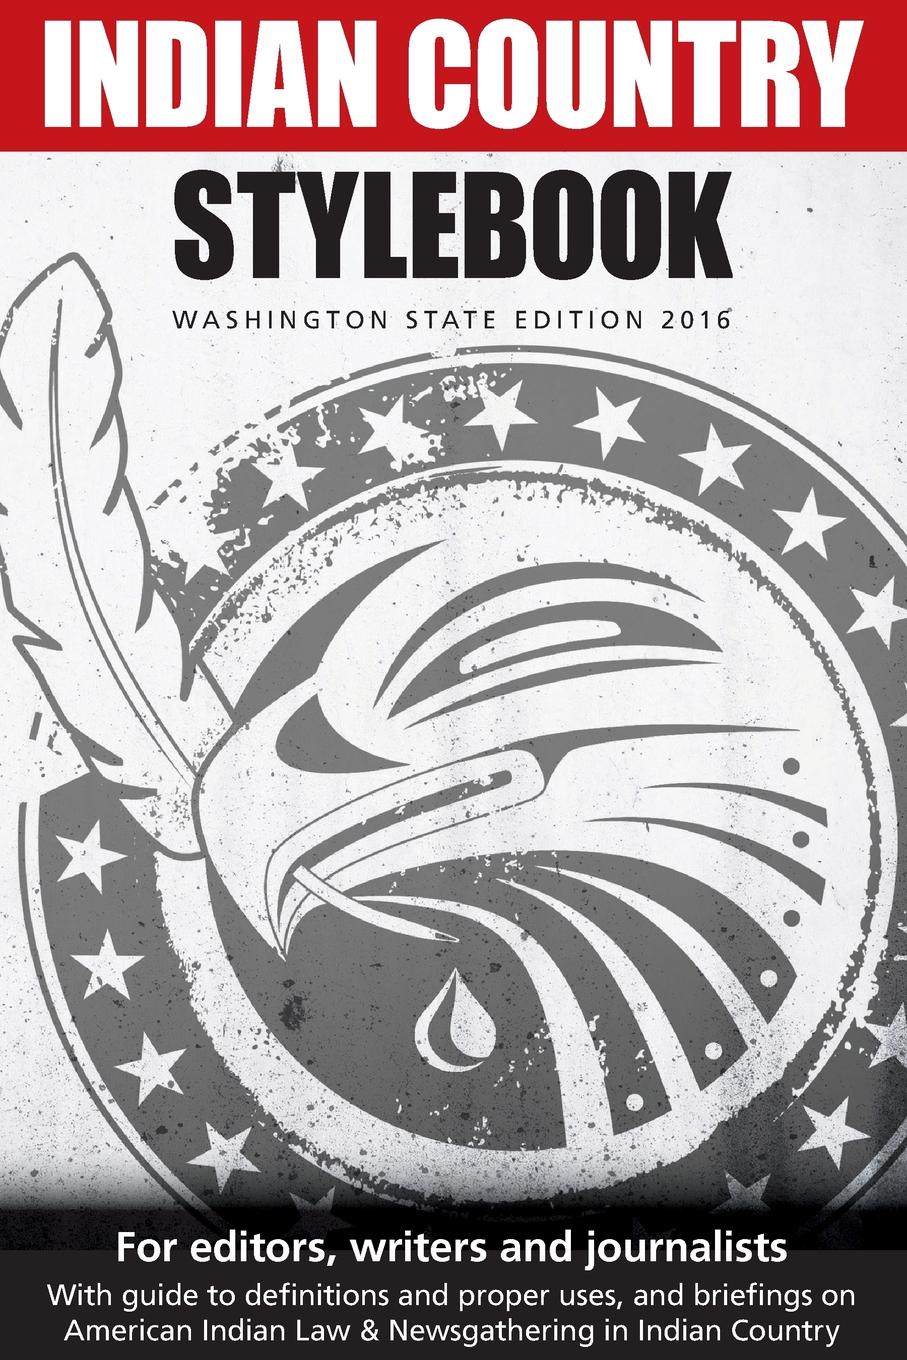 Indian Country Stylebook (2016). Style Guide for Editors, Writers and Journalists